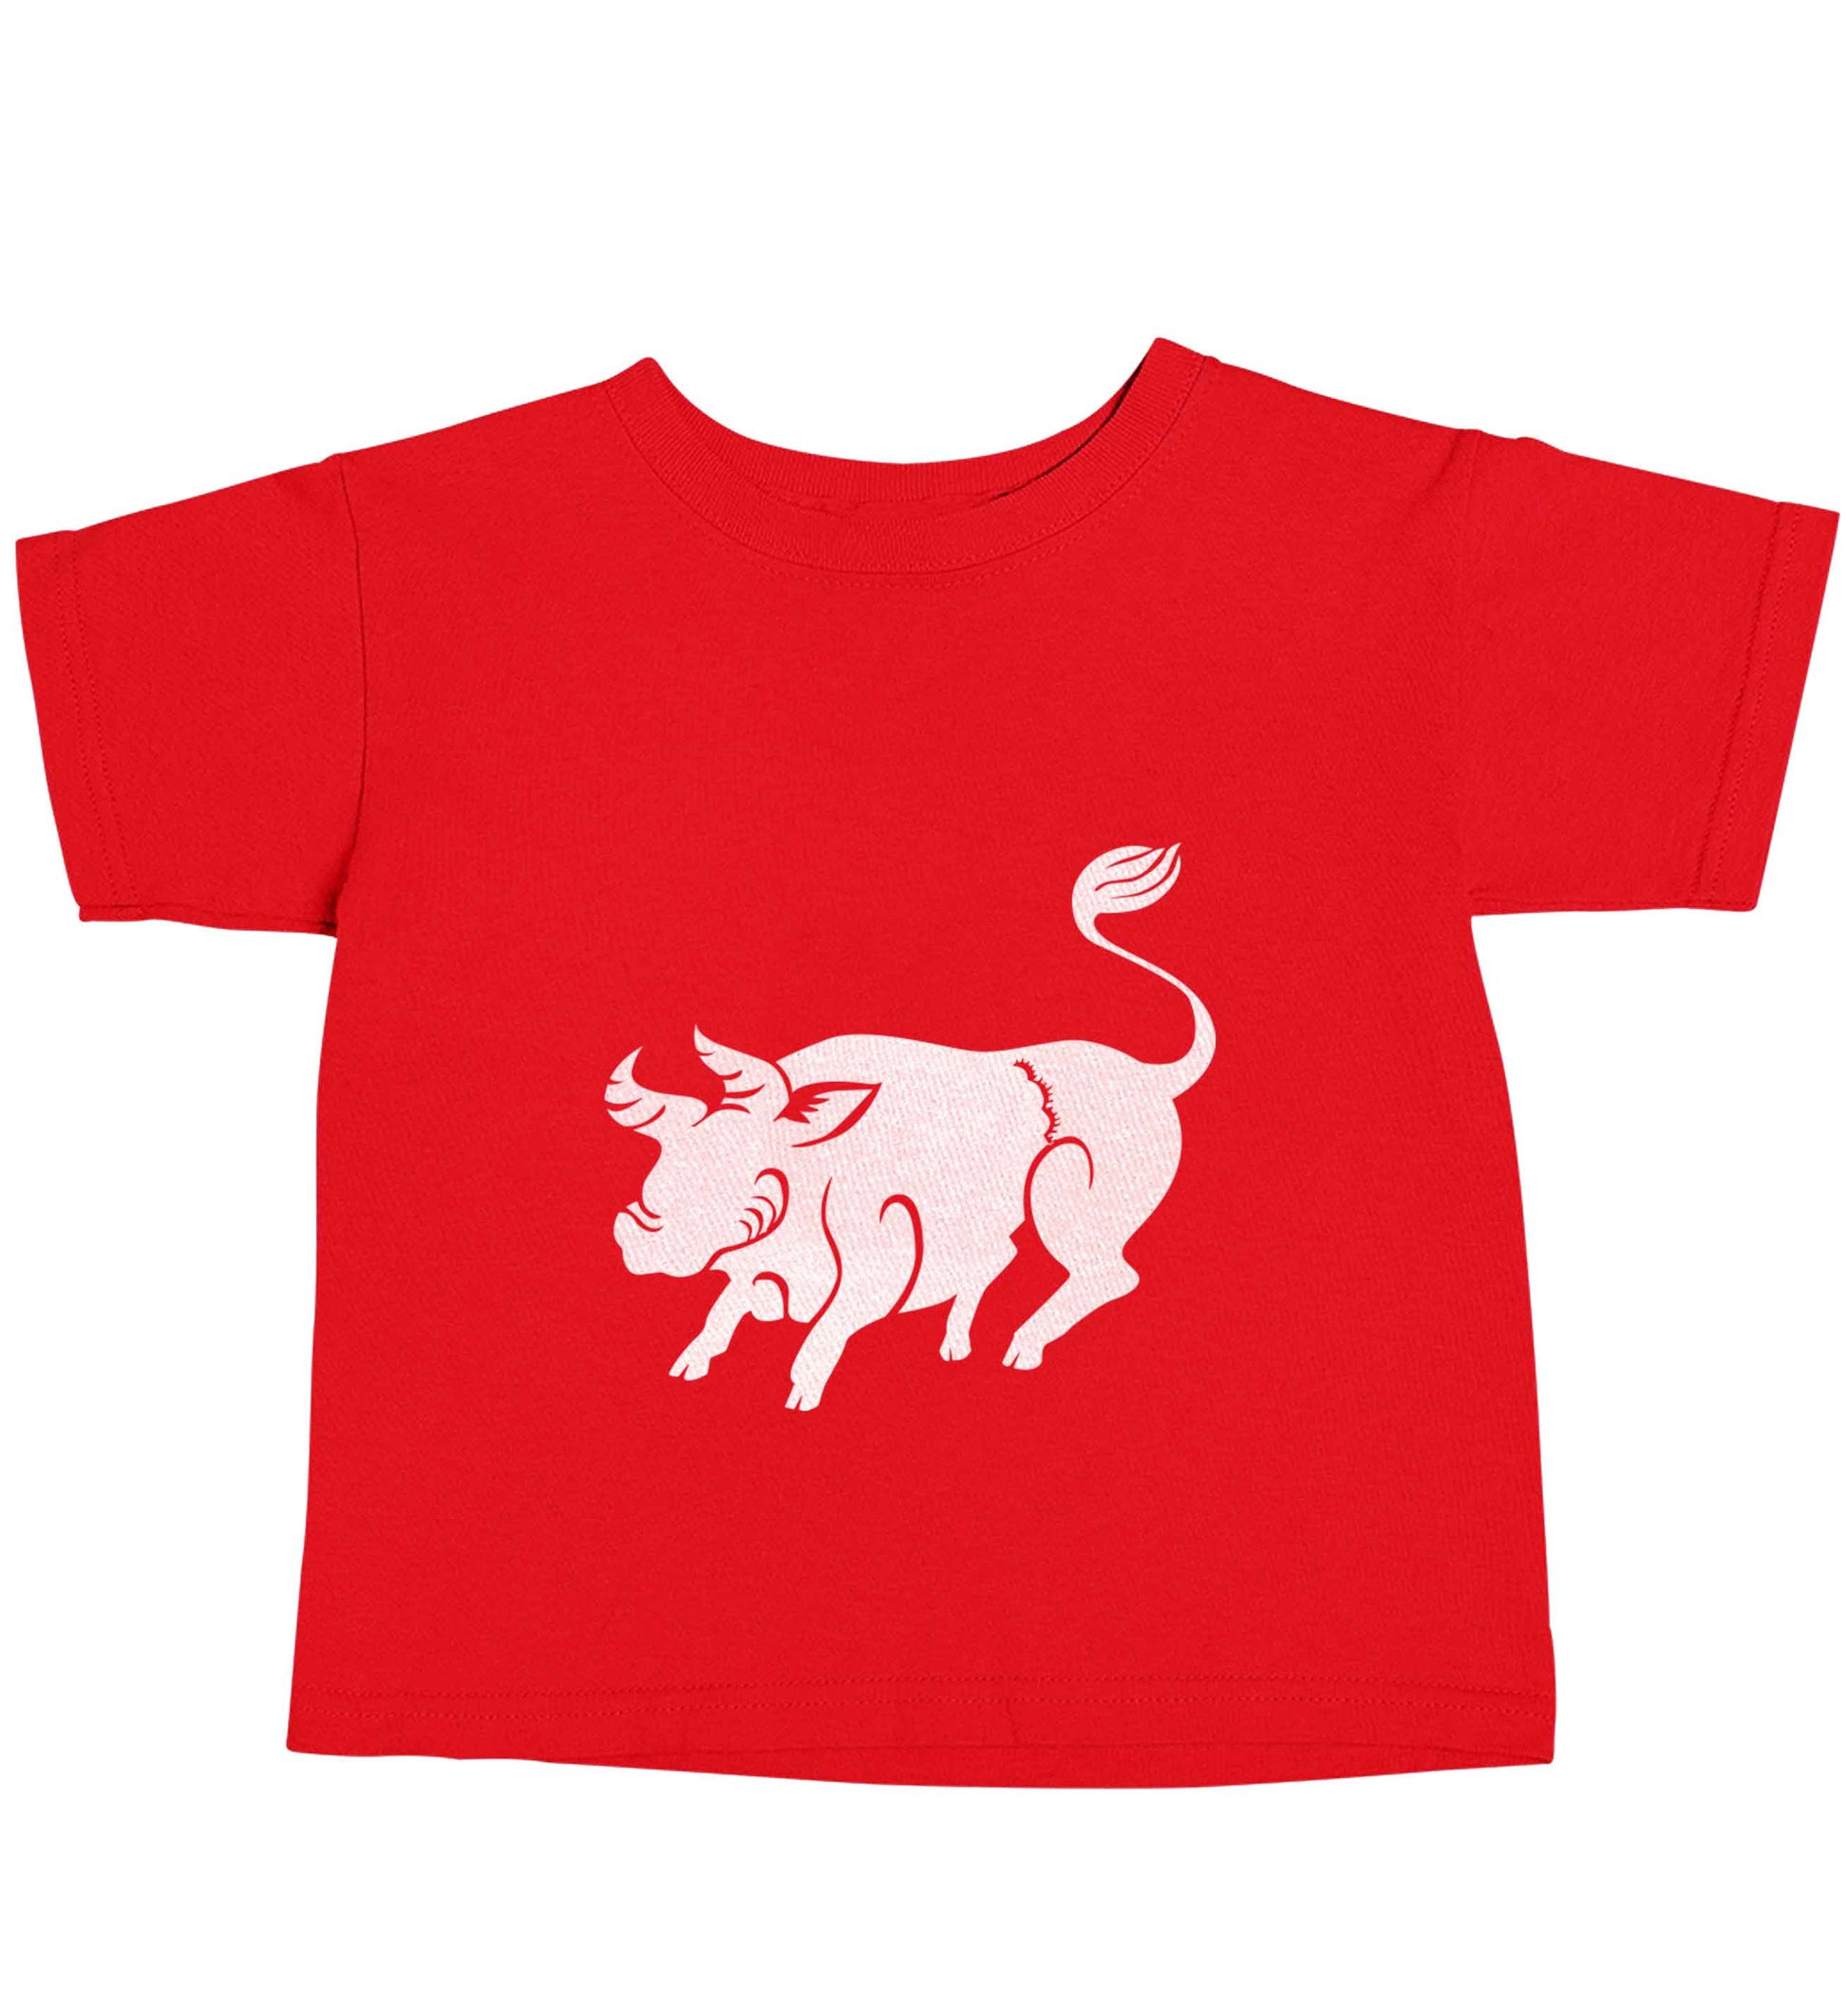 Blue ox red baby toddler Tshirt 2 Years